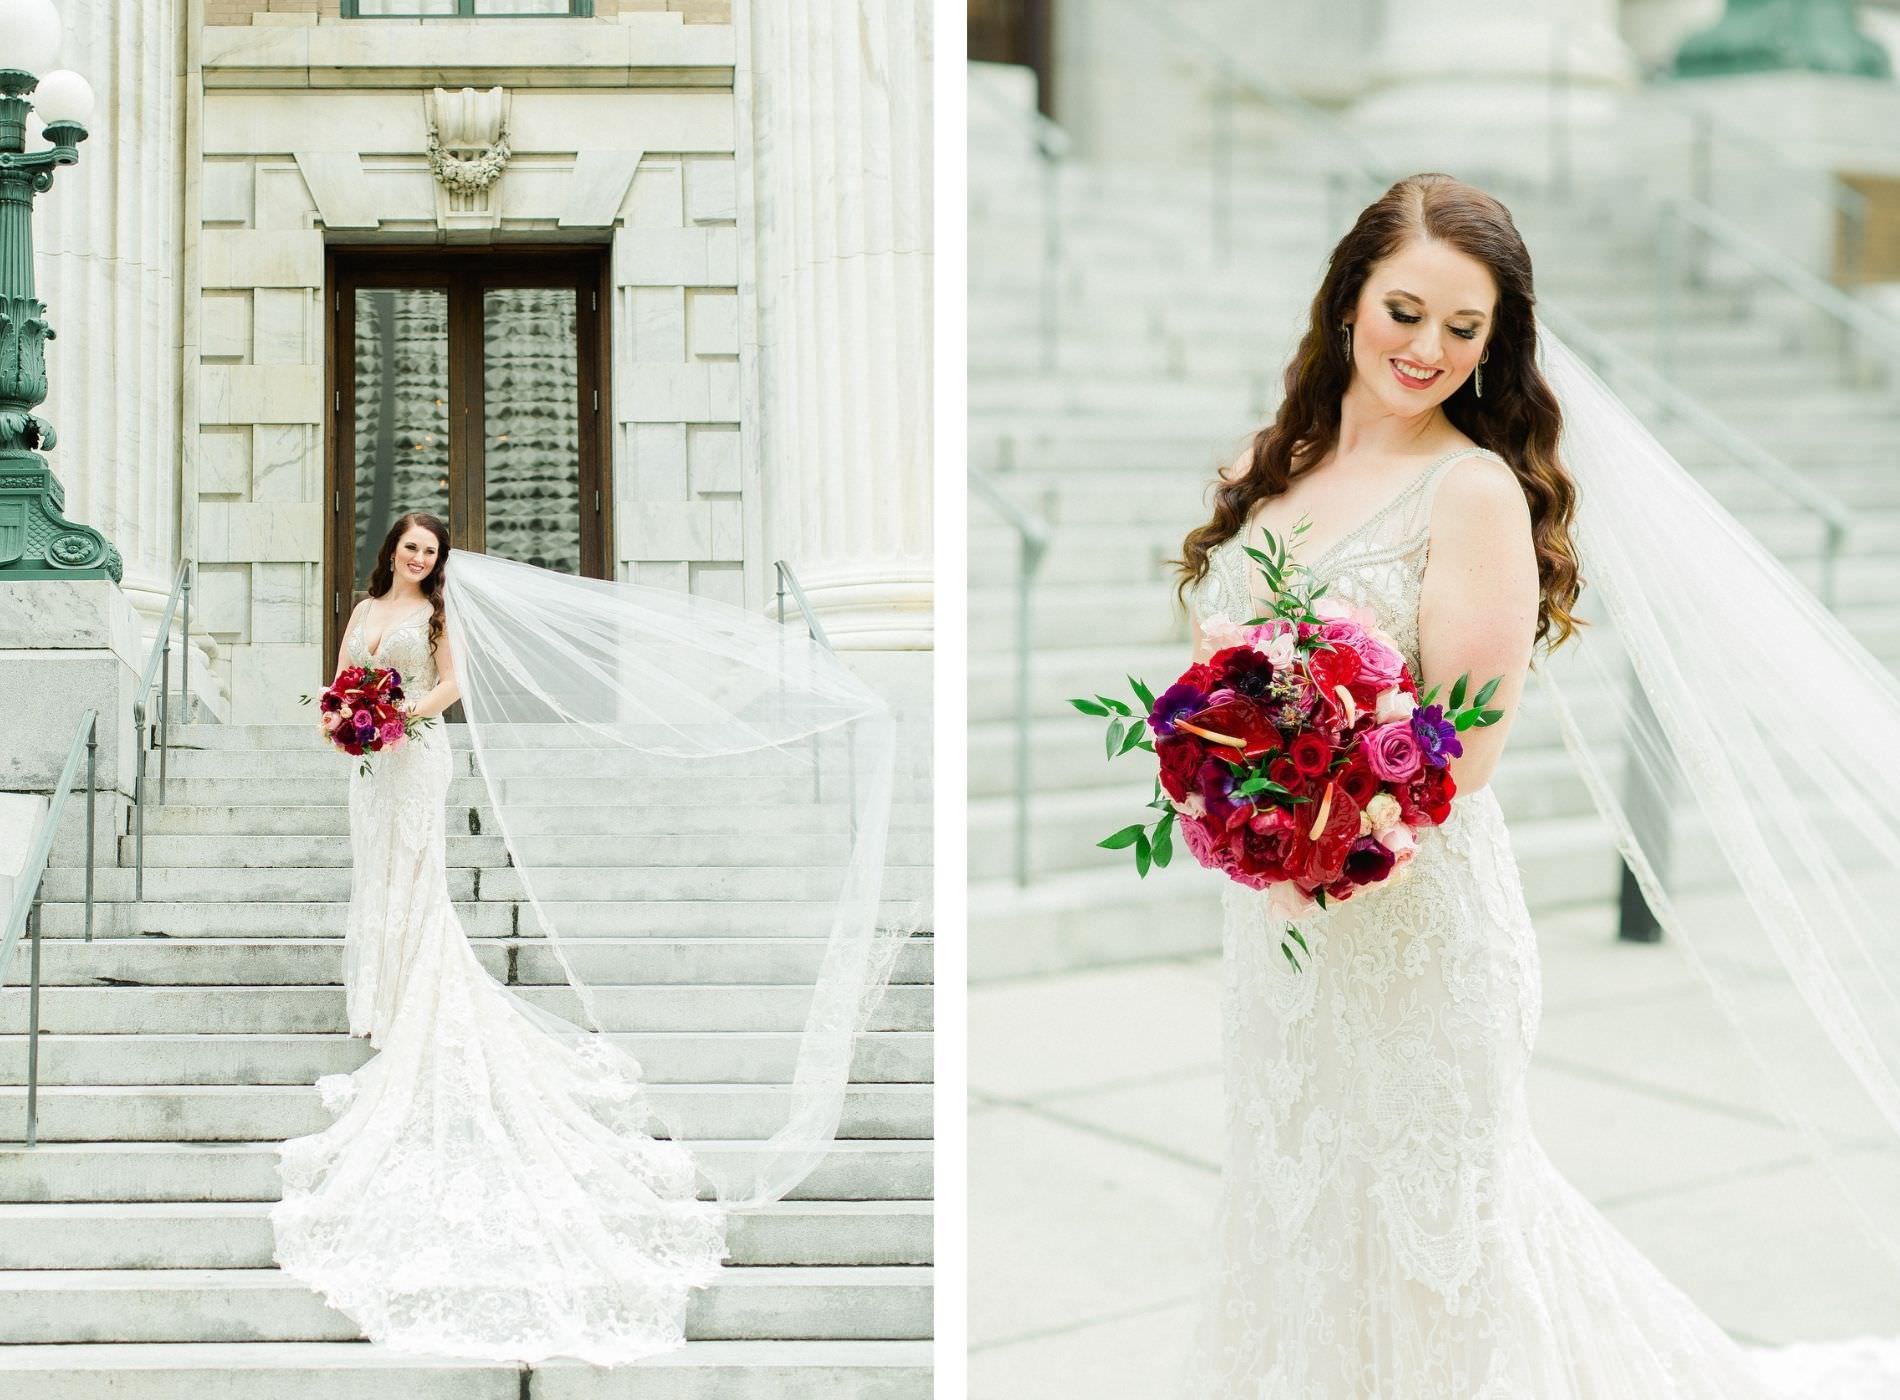 Outdoor Staircase Downtown Tampa Bridal Portrait | Bride Wearing Embroidered Rhinestone Circle Veil | Rhinestone Embroidered Wedding Dress Bridal Gown | Bright Colorful Pink and Red Wedding Bridal Bouquet with Roses and Flamingo Lilies Anthurium